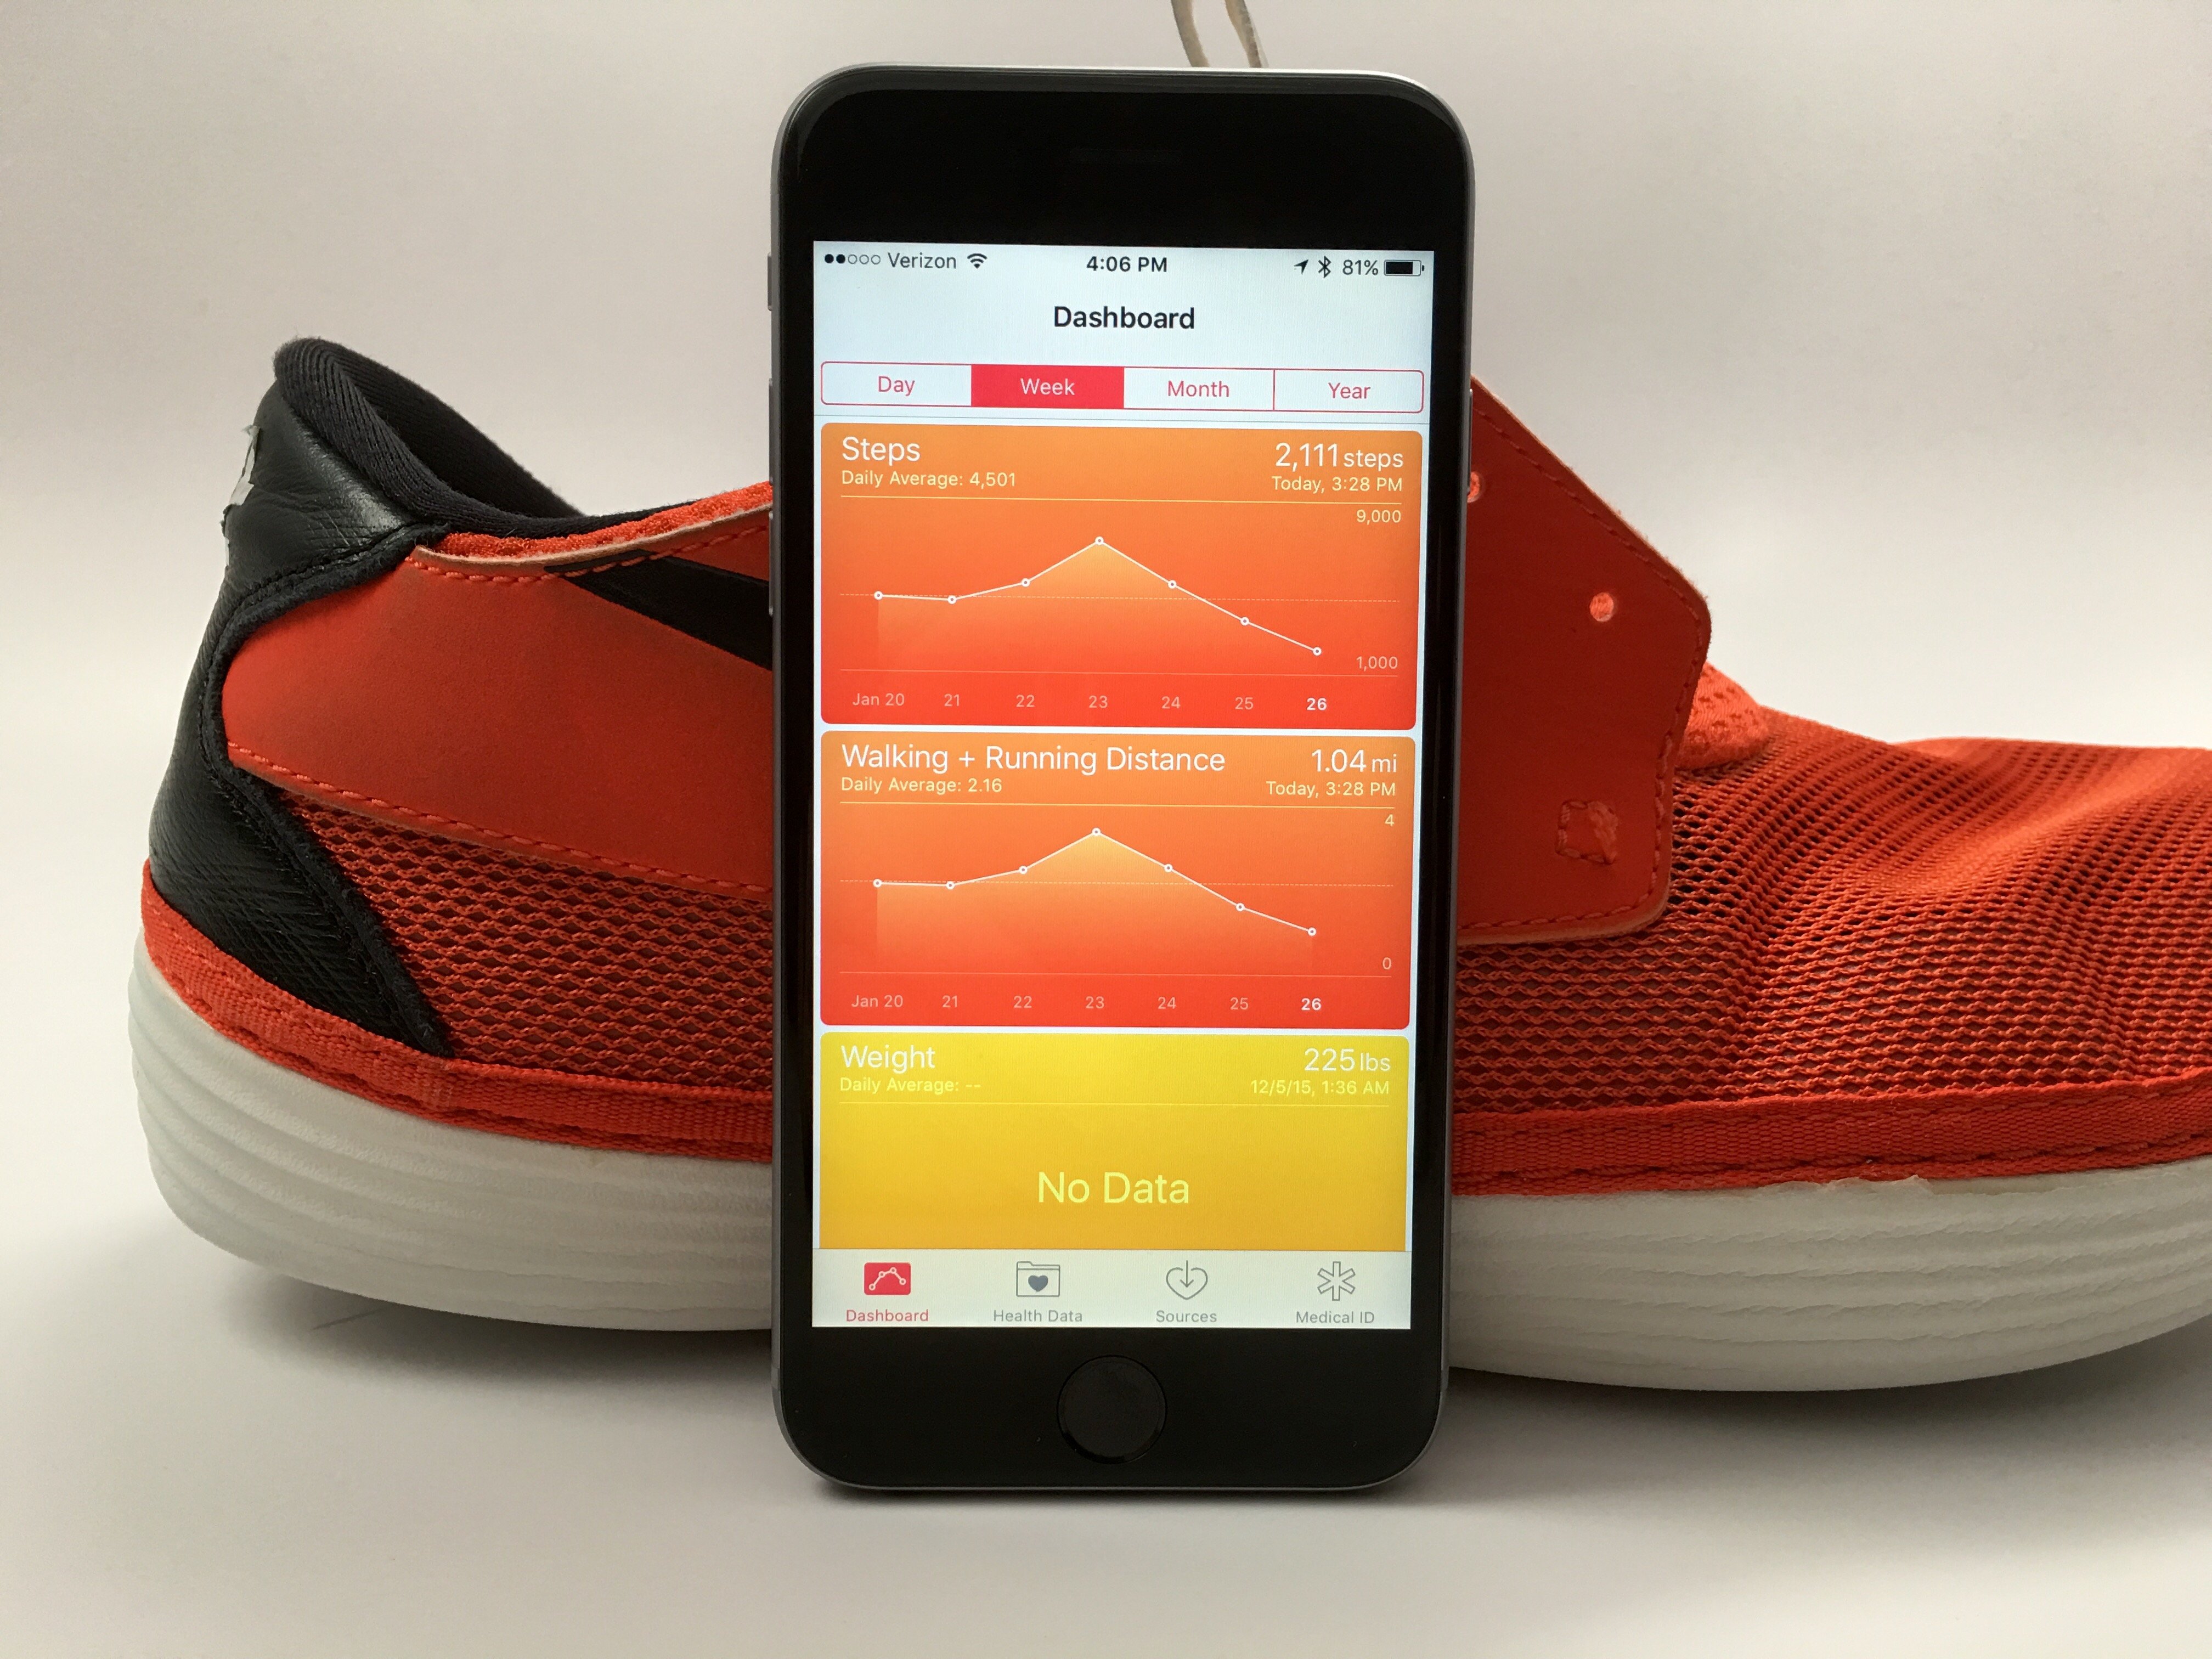 How to track steps on iPhone using the Health app in iOS 8 and iOS 9.